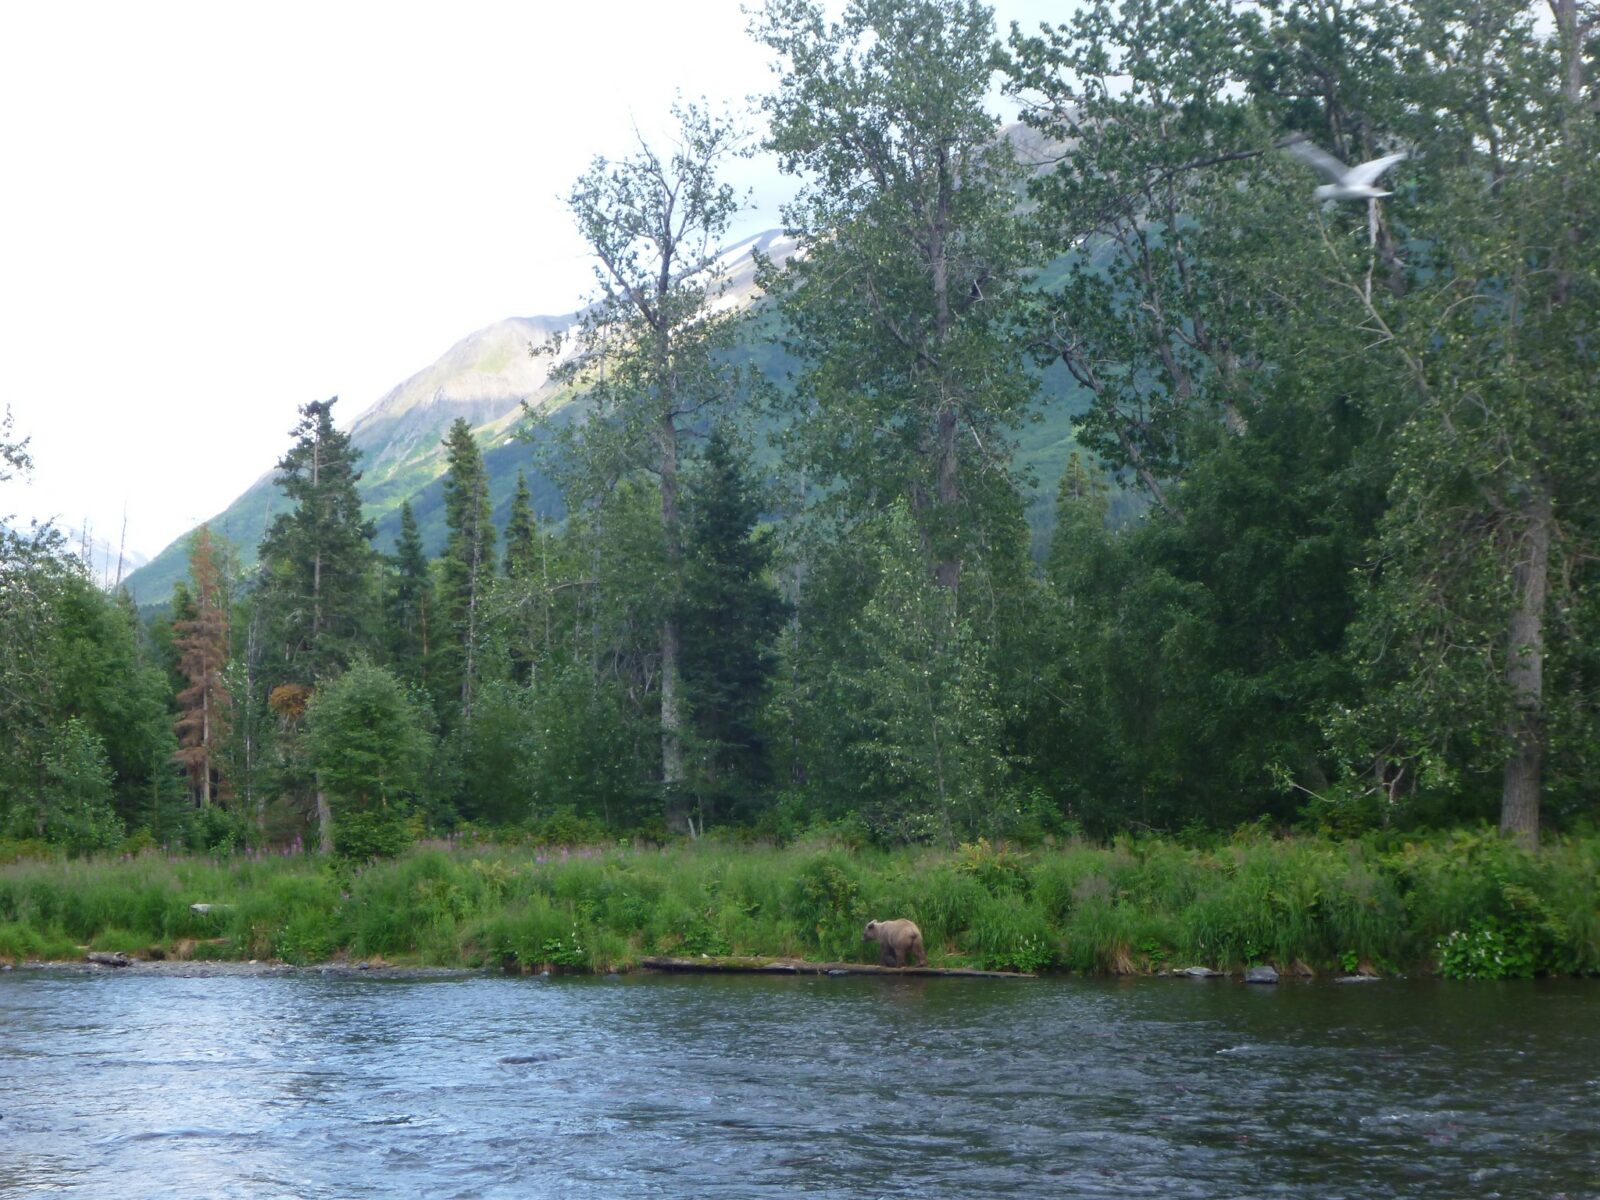 A brown bear on the shore of the Russian River. Behind the bear are bushes and then a forest and in the distance, higher mountains